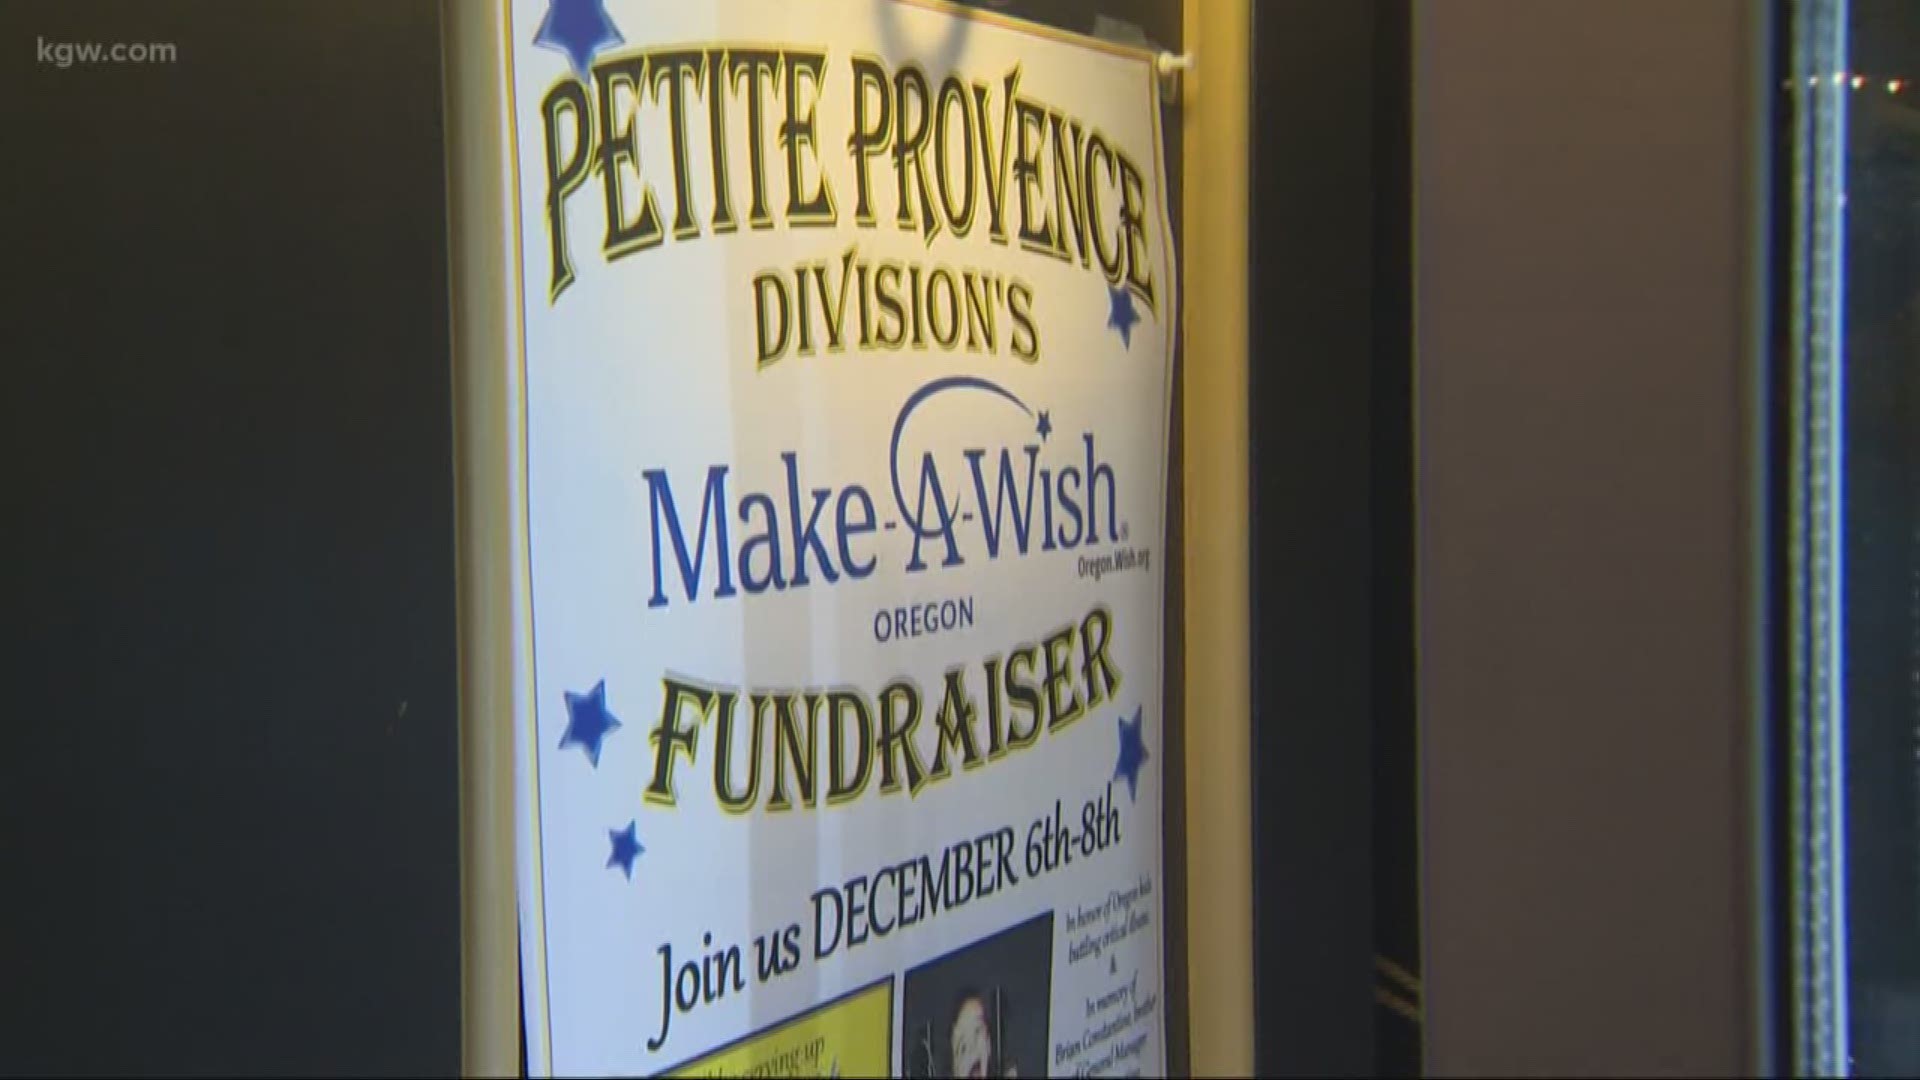 A Portland man is raising money for the Make-A-Wish foundation by asking customers to raise a glass at his restaurant.